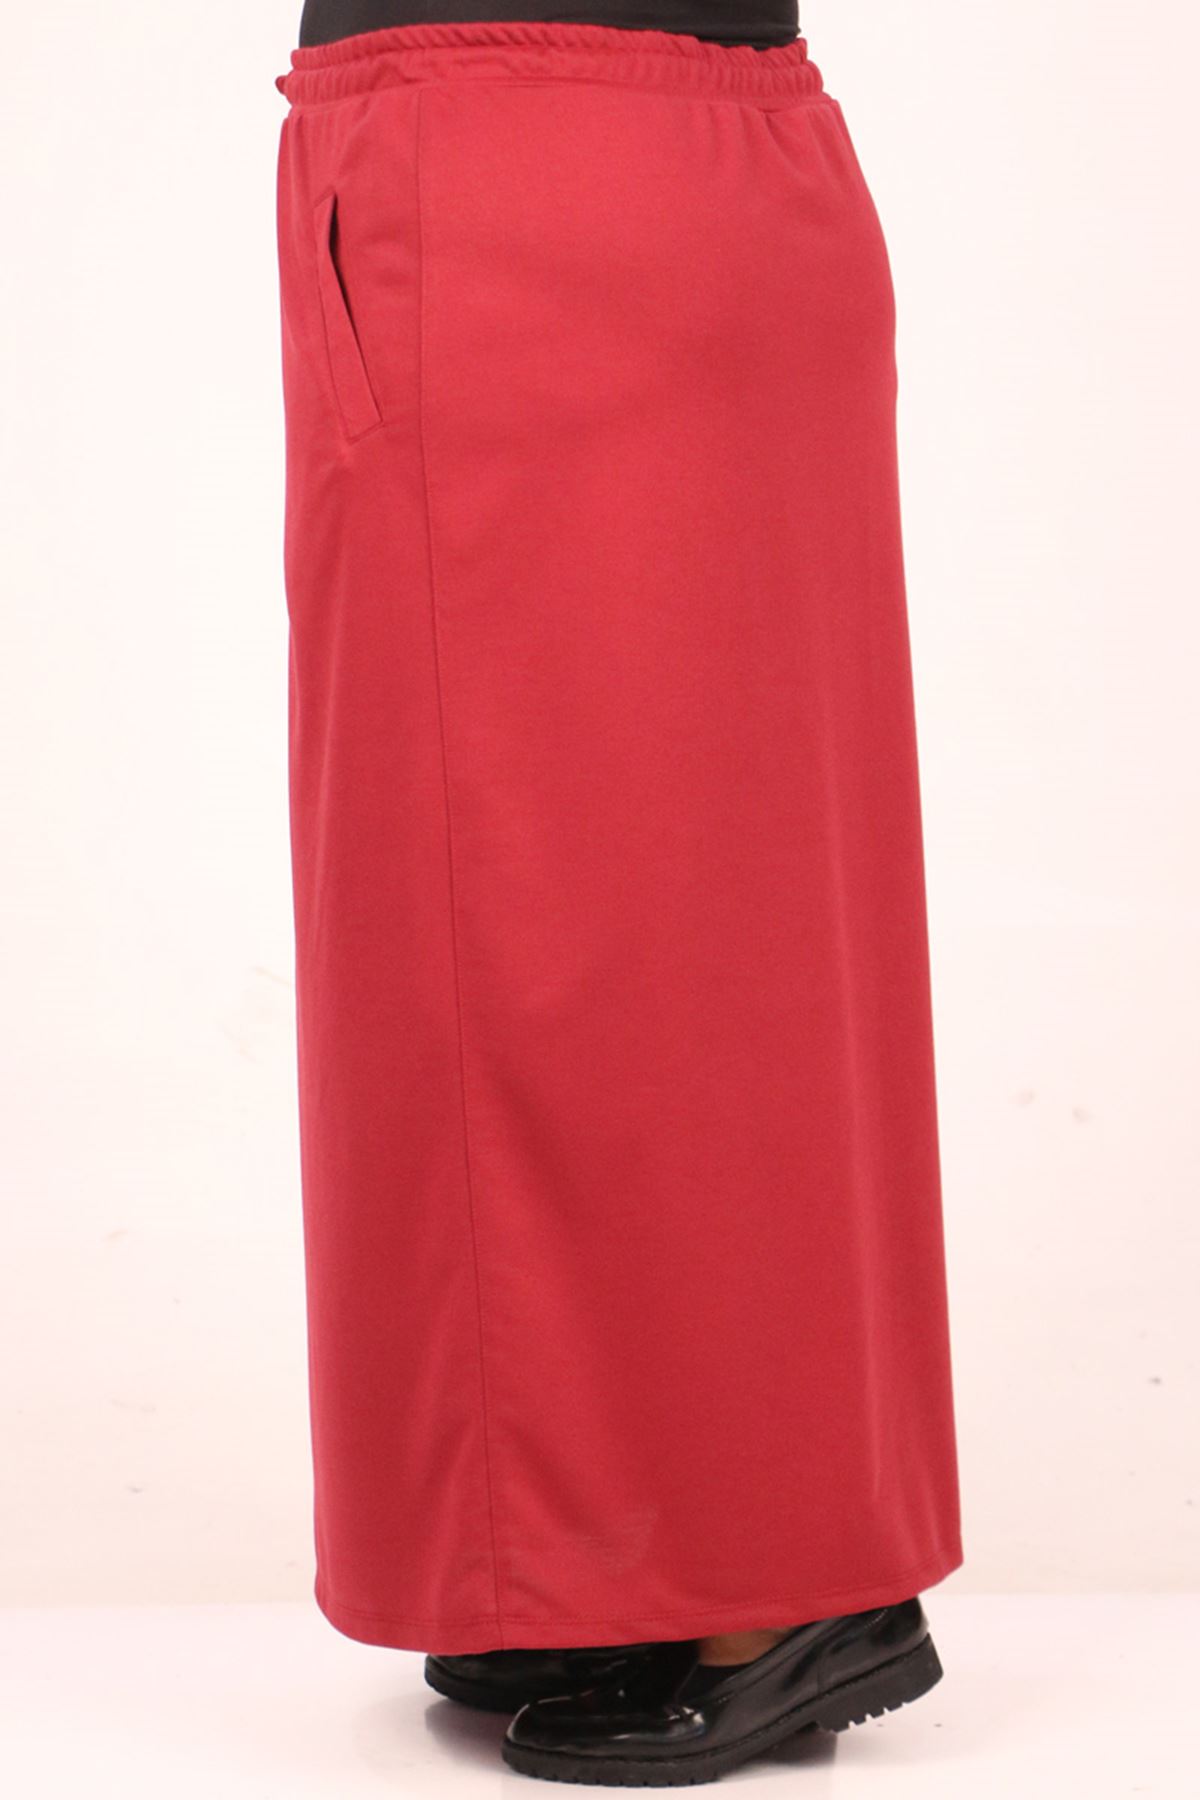 35004 Large Size Two Thread Piece Skirt-Sax